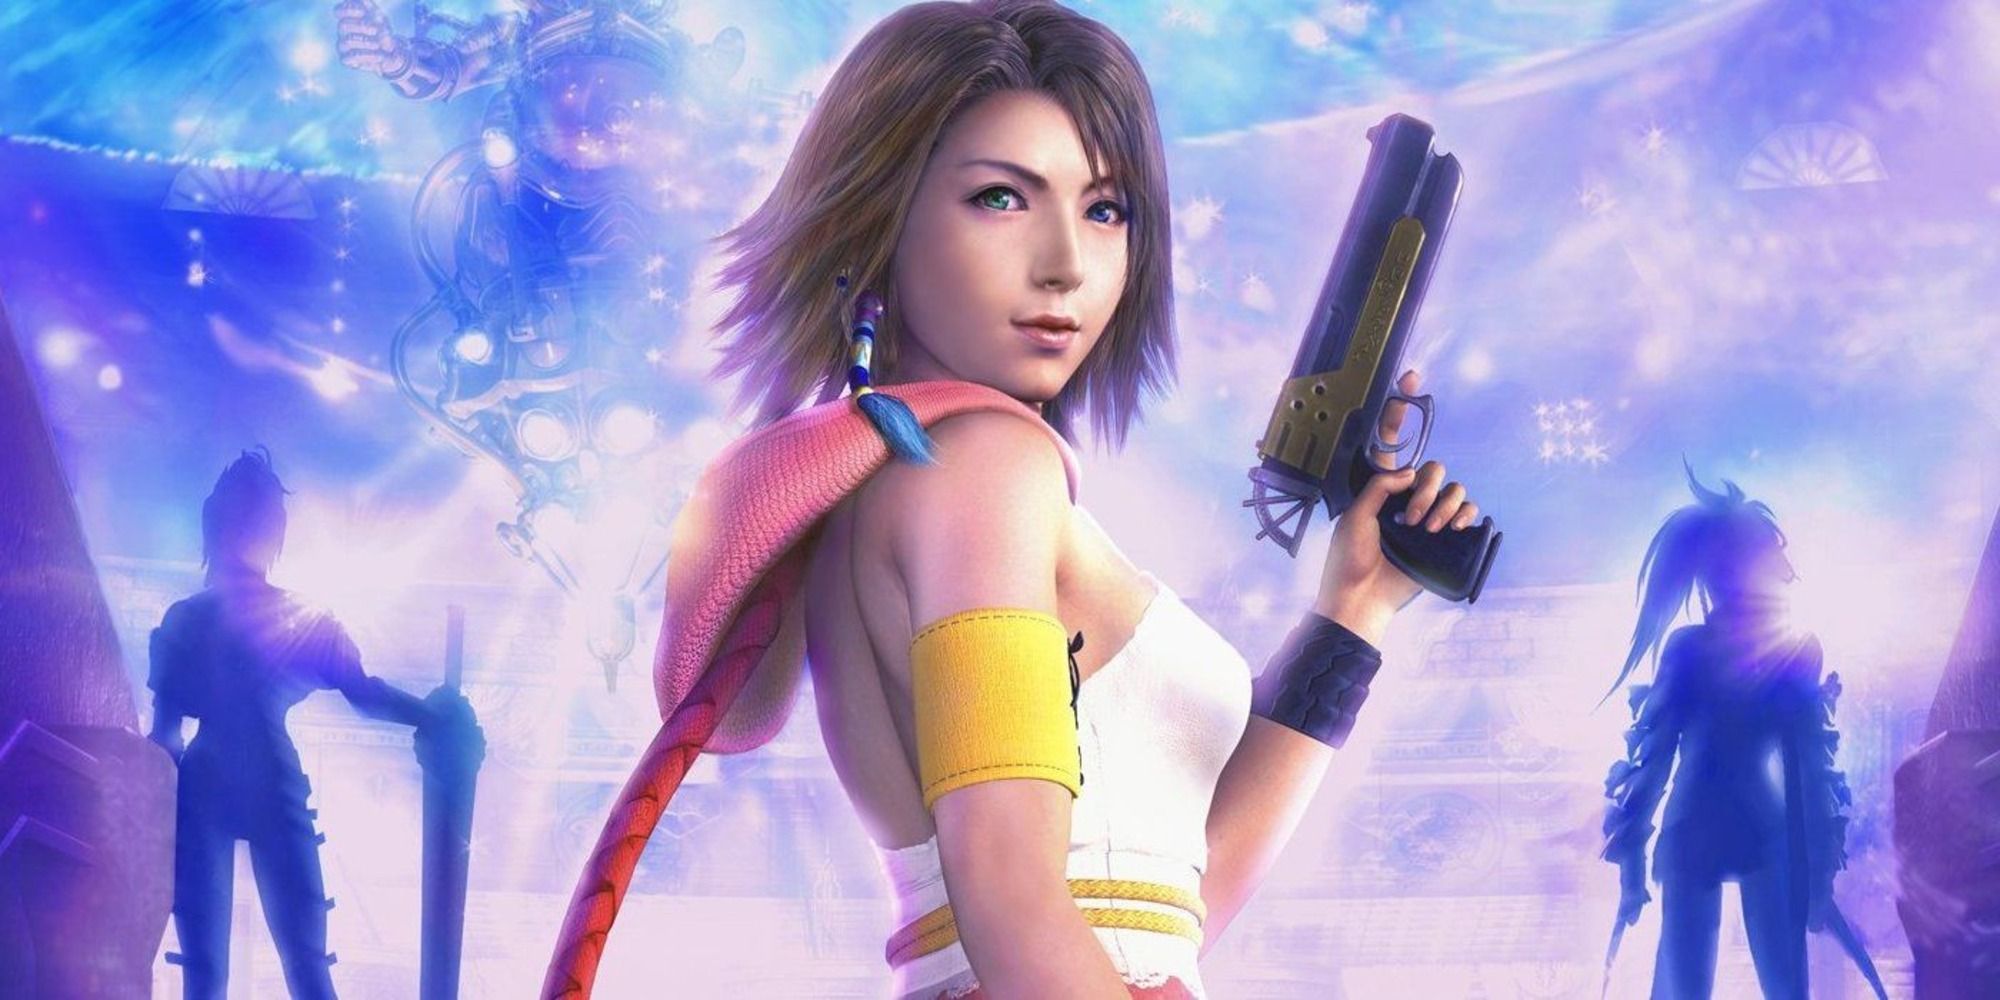 Final Fantasy X-2 10-2 Yuna with Paine and Rikku in the background